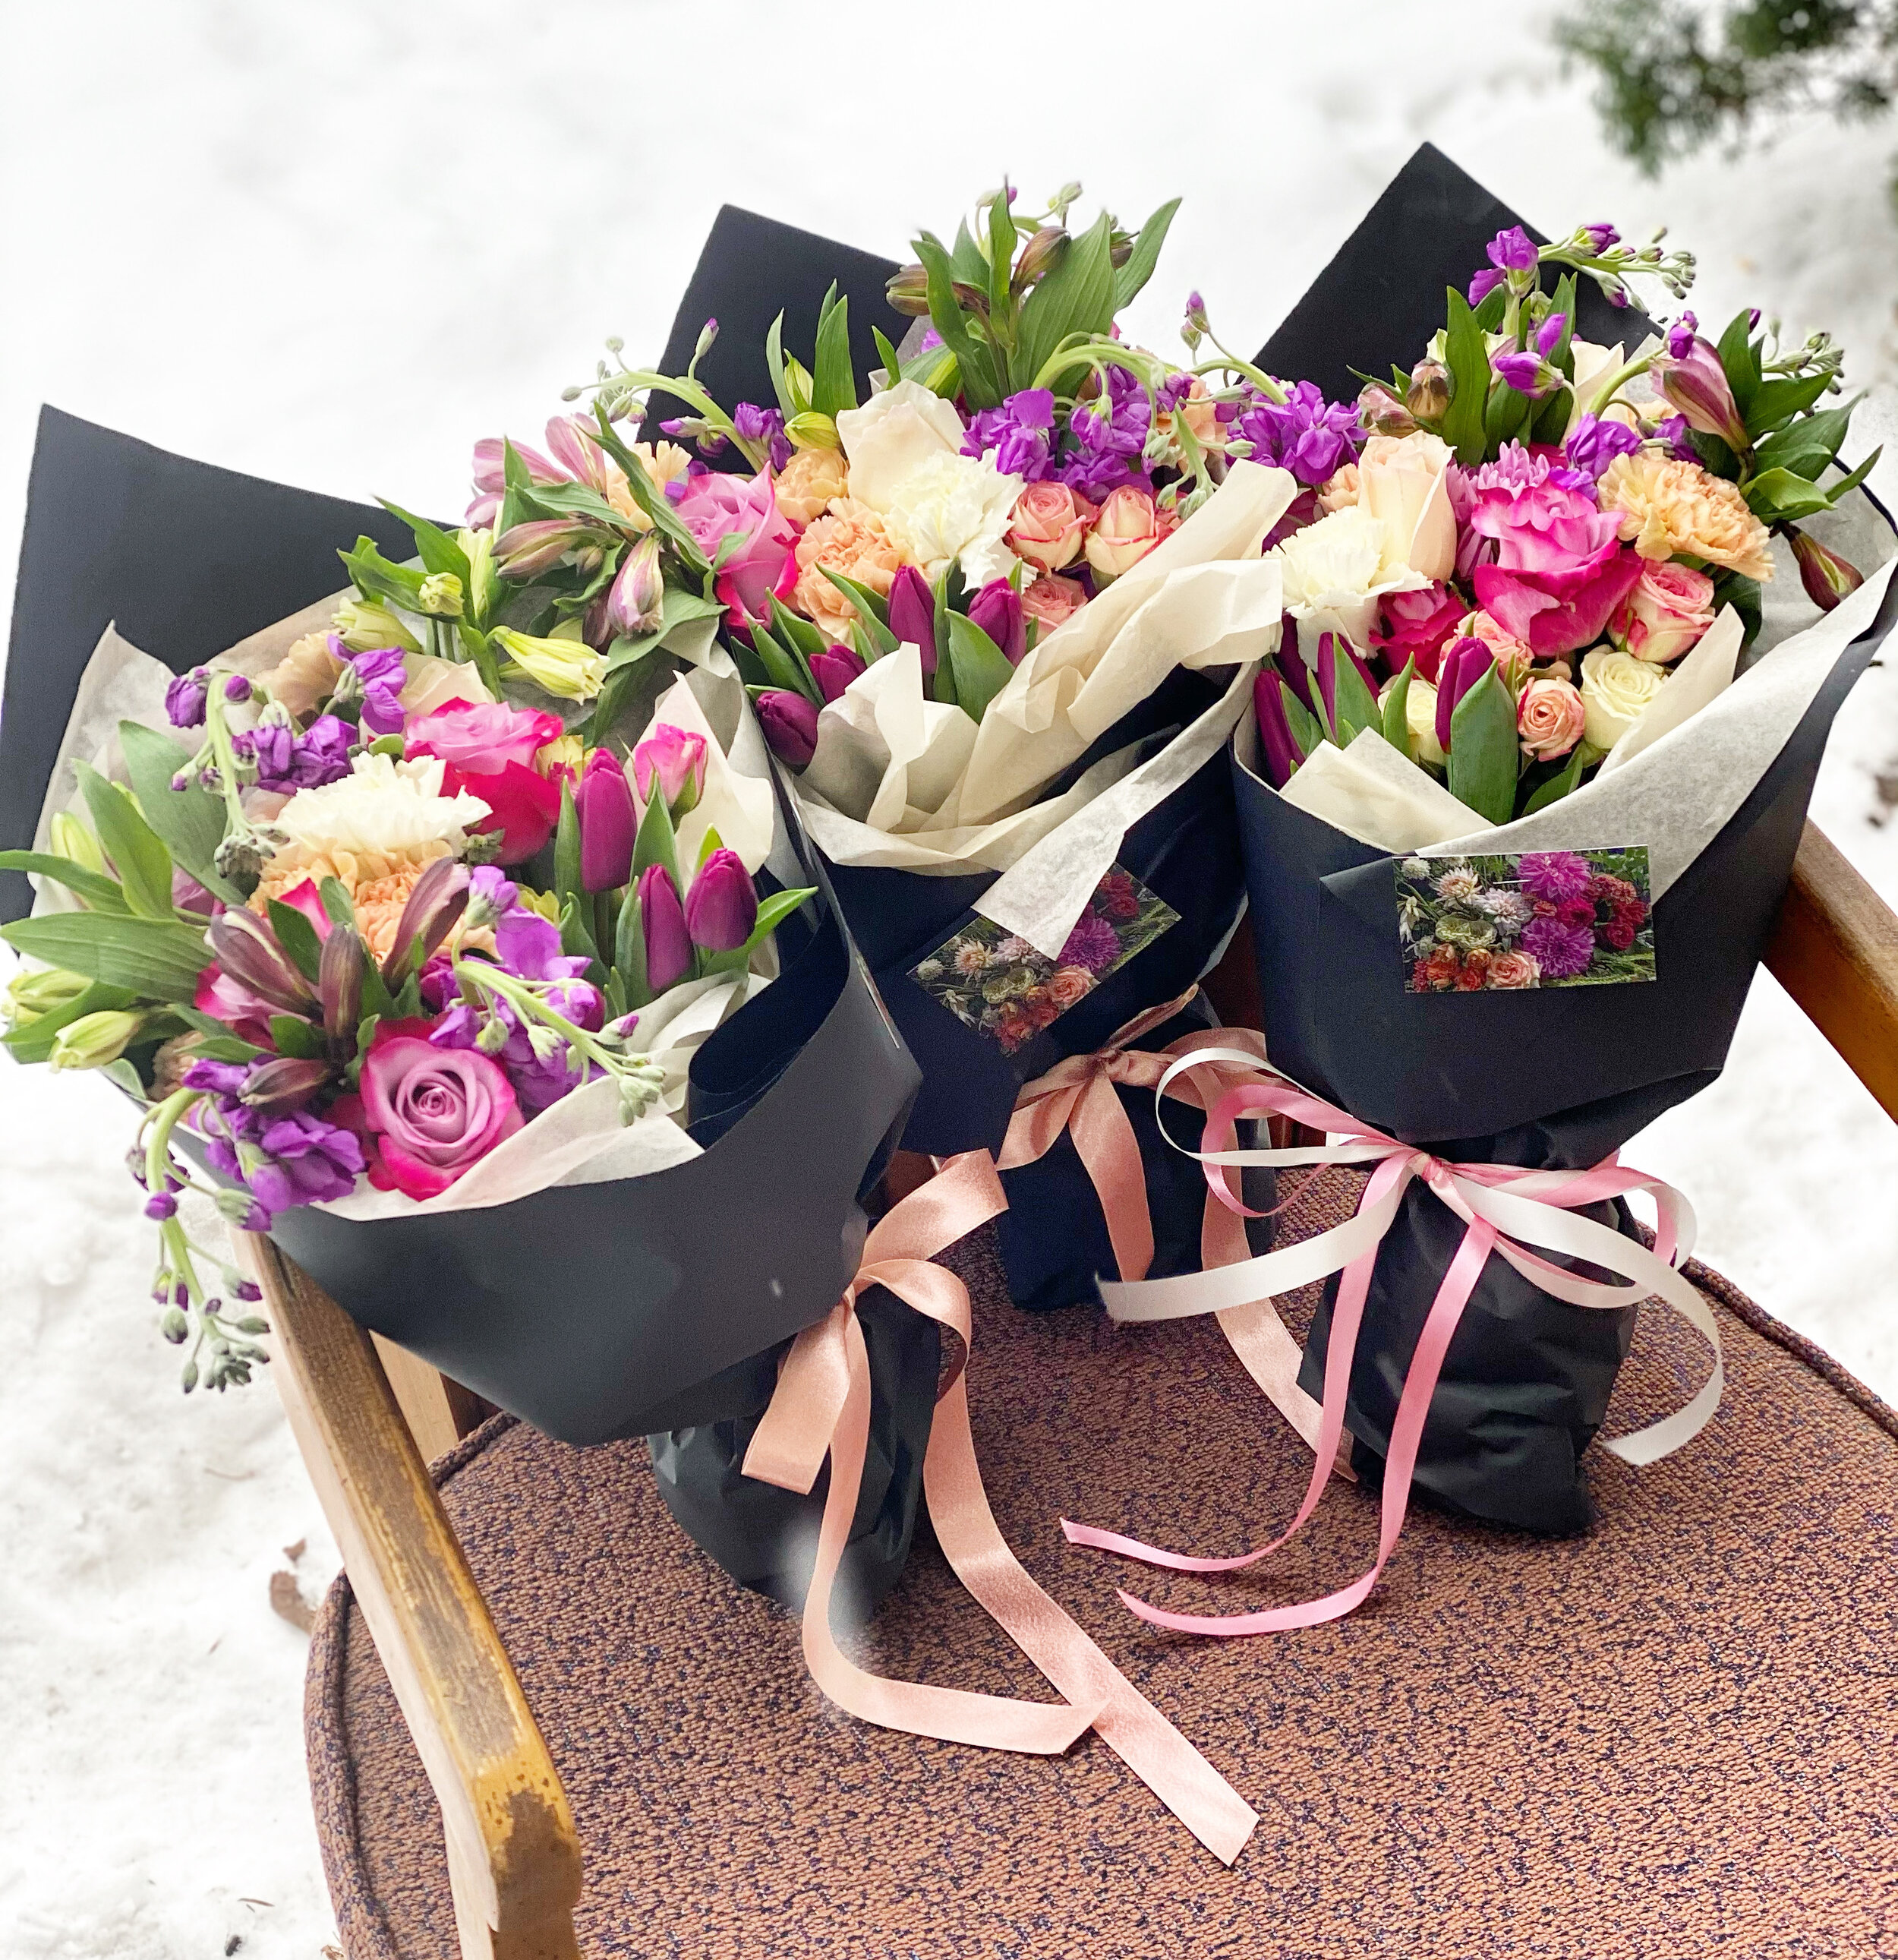 Fresh Flower Bouquet - KL & PJ Delivery Birthday, Gifting & Surprise.